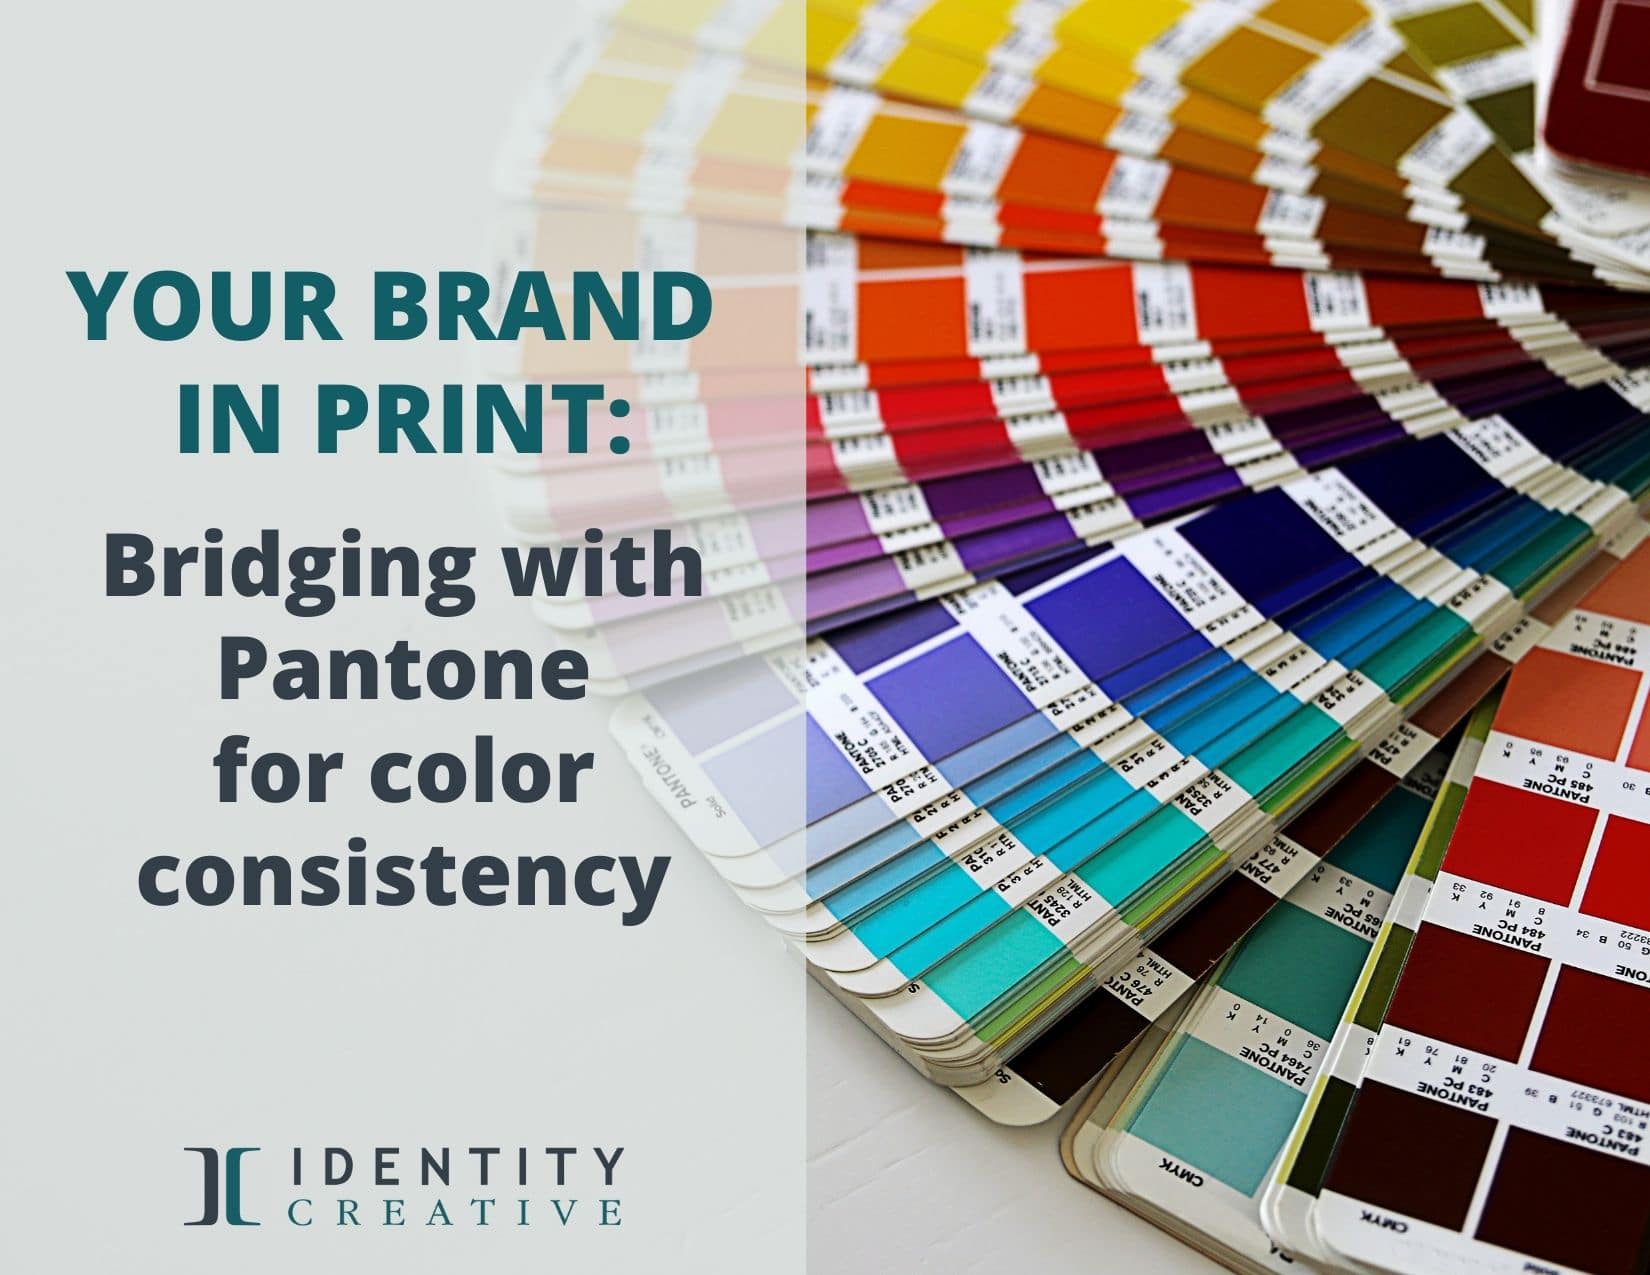 Your Brand in Print: Bridging with Pantone for Color Consistency